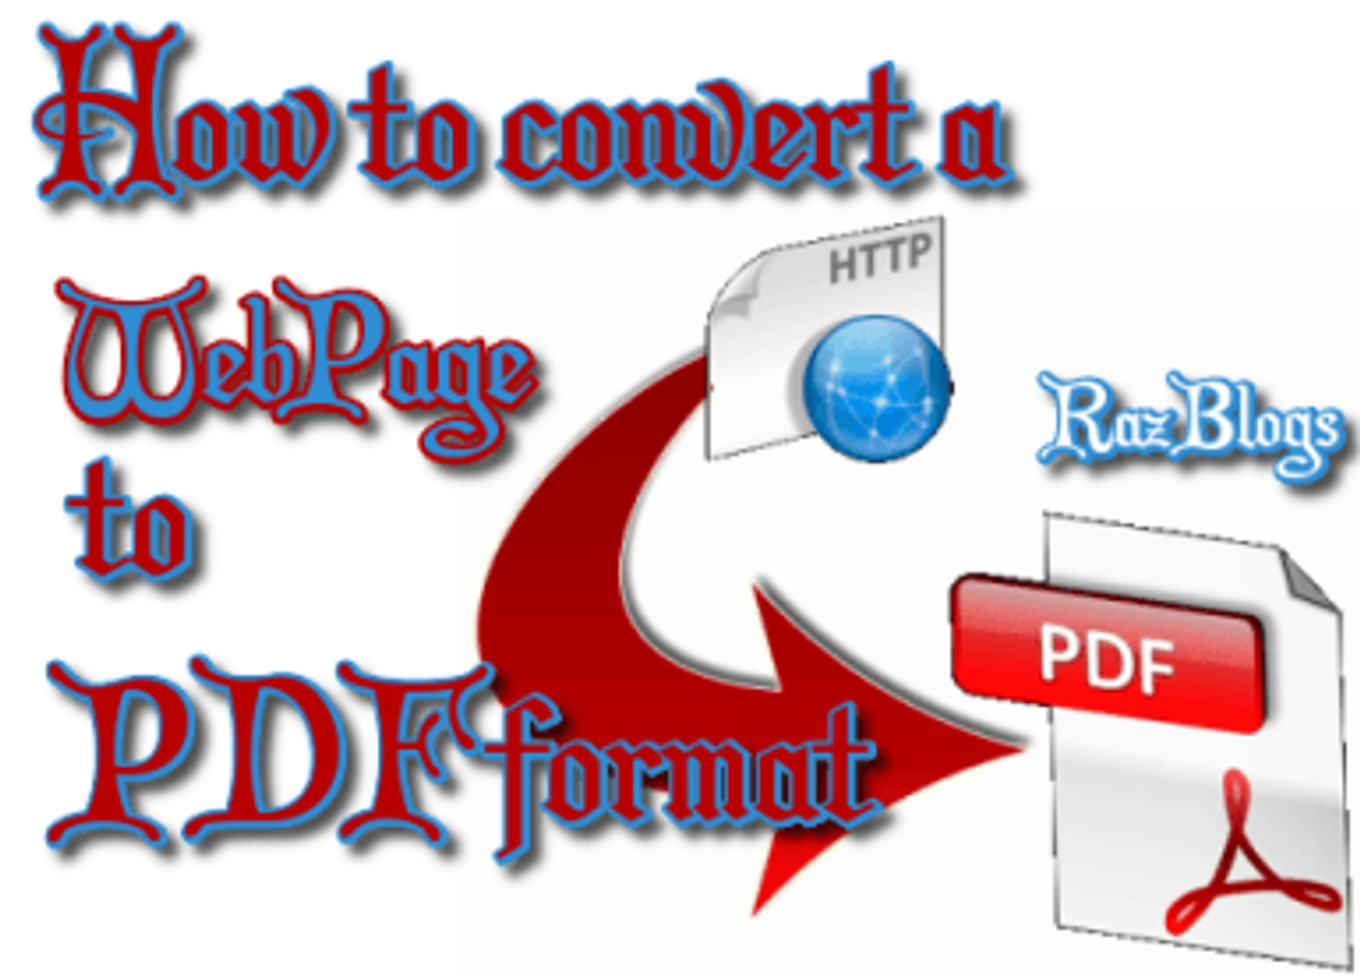 how-to-convert-a-webpage-to-pdf-format-with-in-seconds-an-island-for